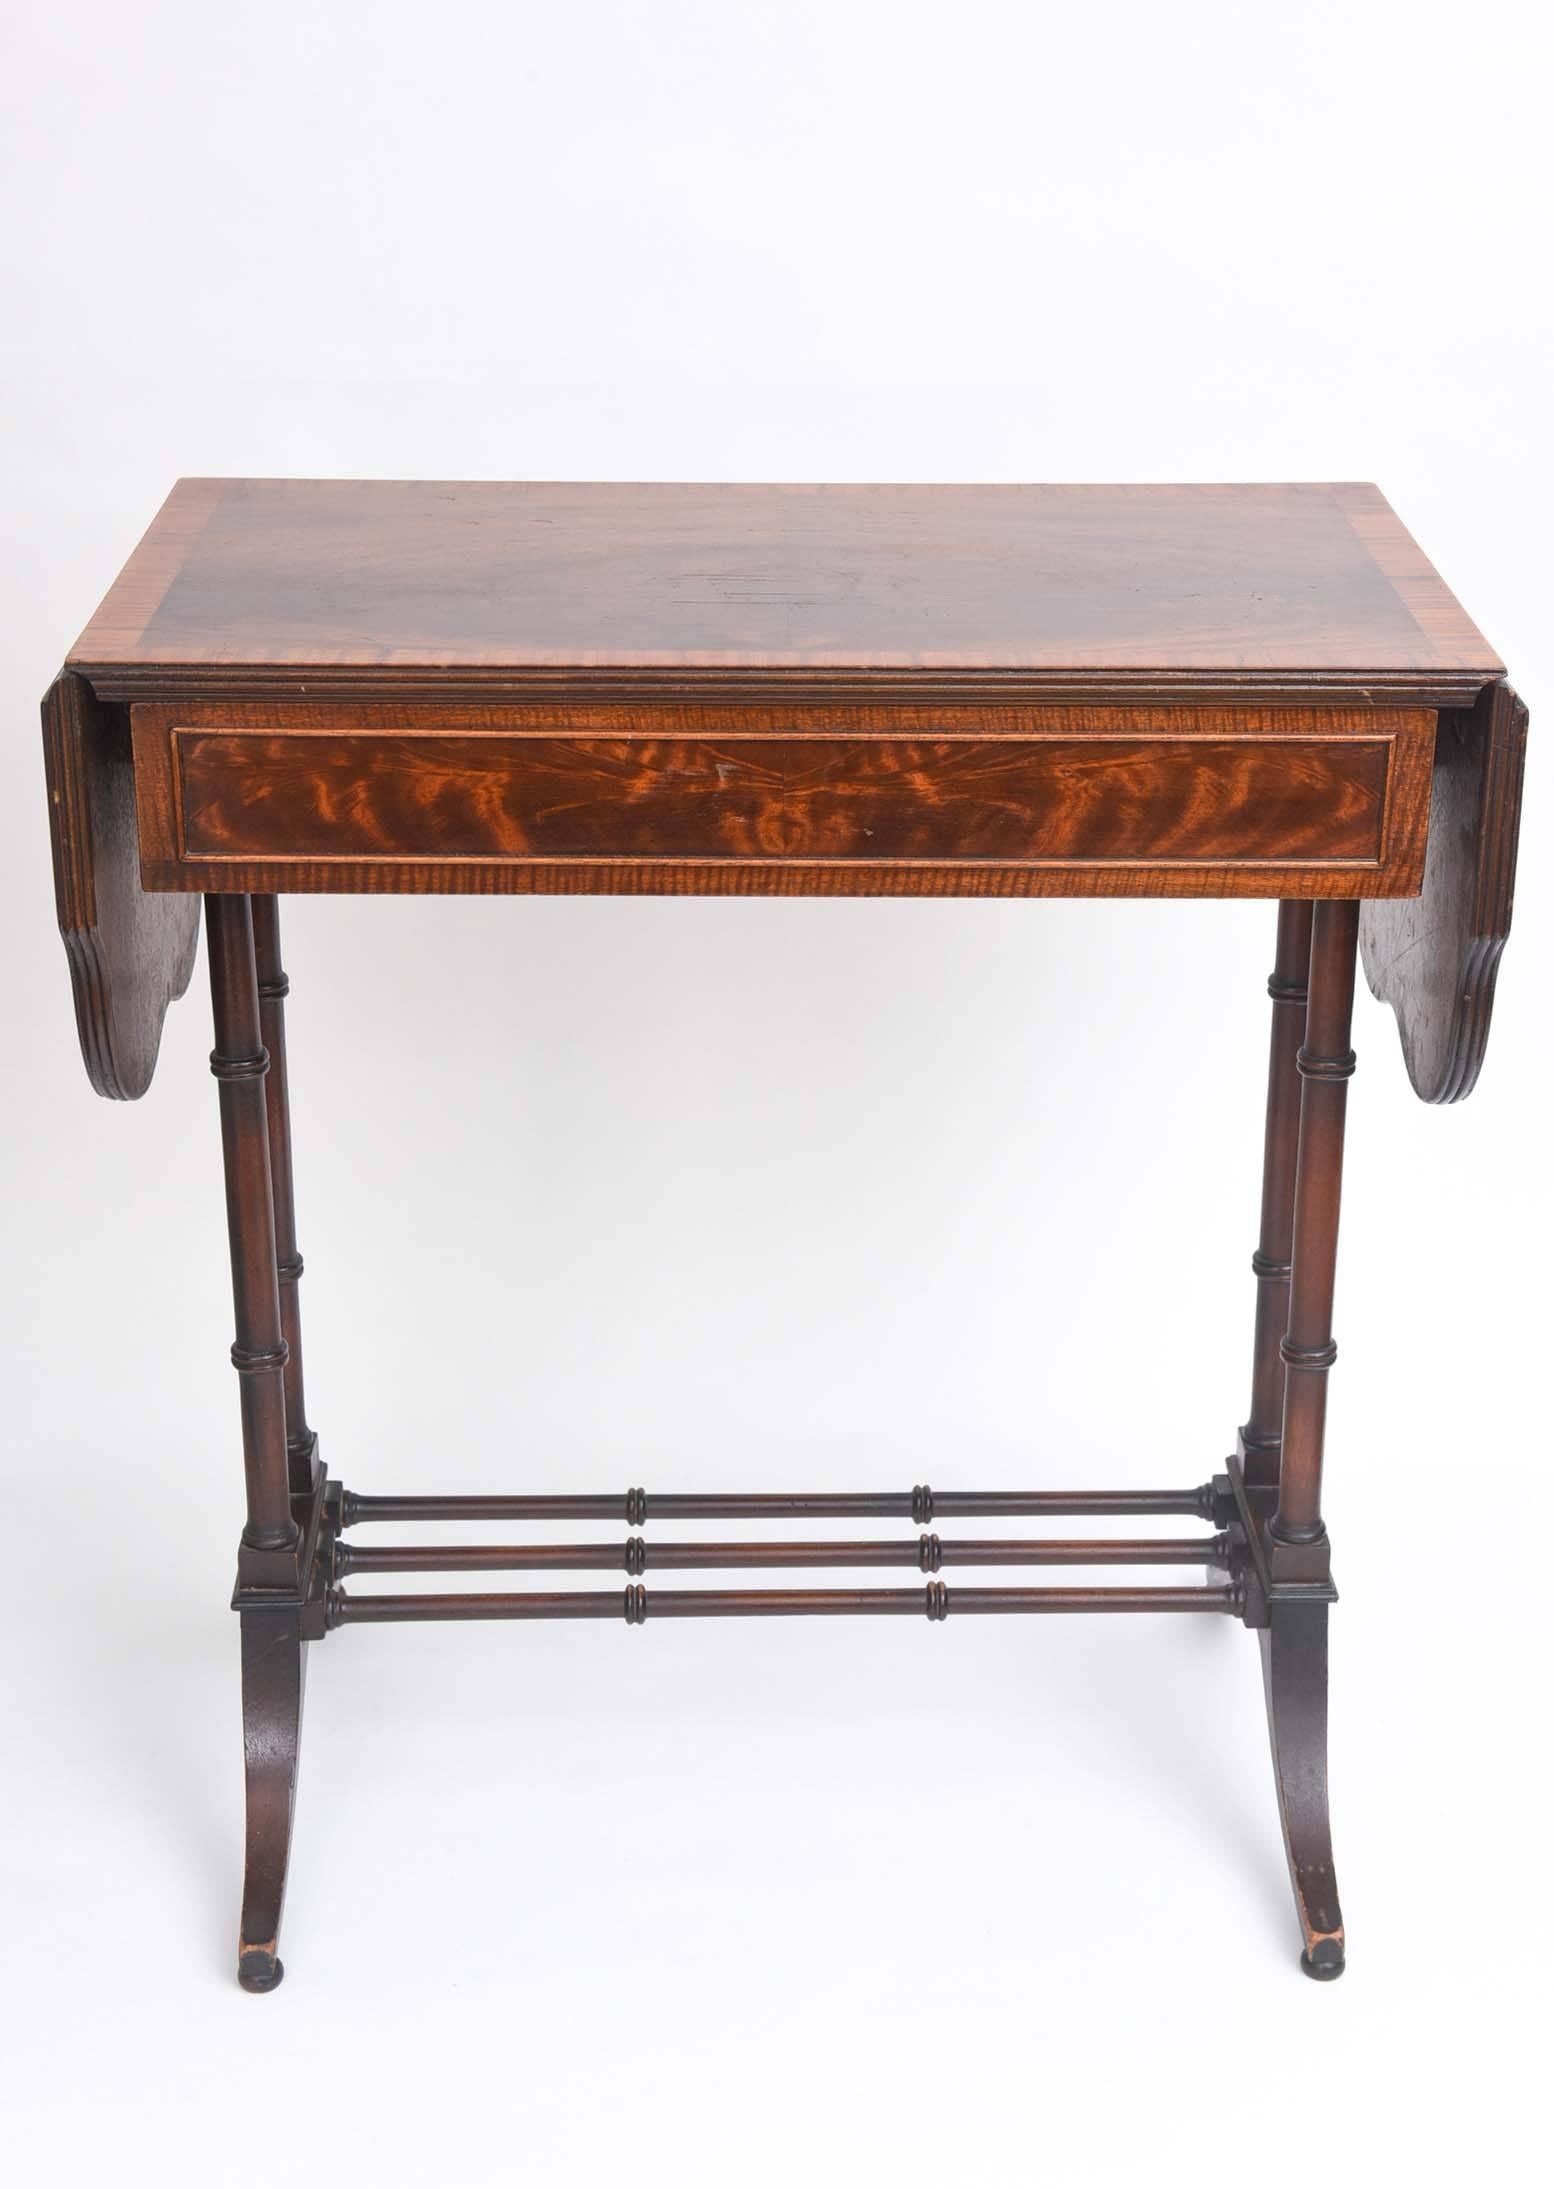 An interesting antique and versatile table with sides that extend the length. Nicely turned legs and great wood veneers and inlay. Retaining its original label from the fine cabinet and furniture firm of: Johnson-Handley Grand Rapids Michigan.